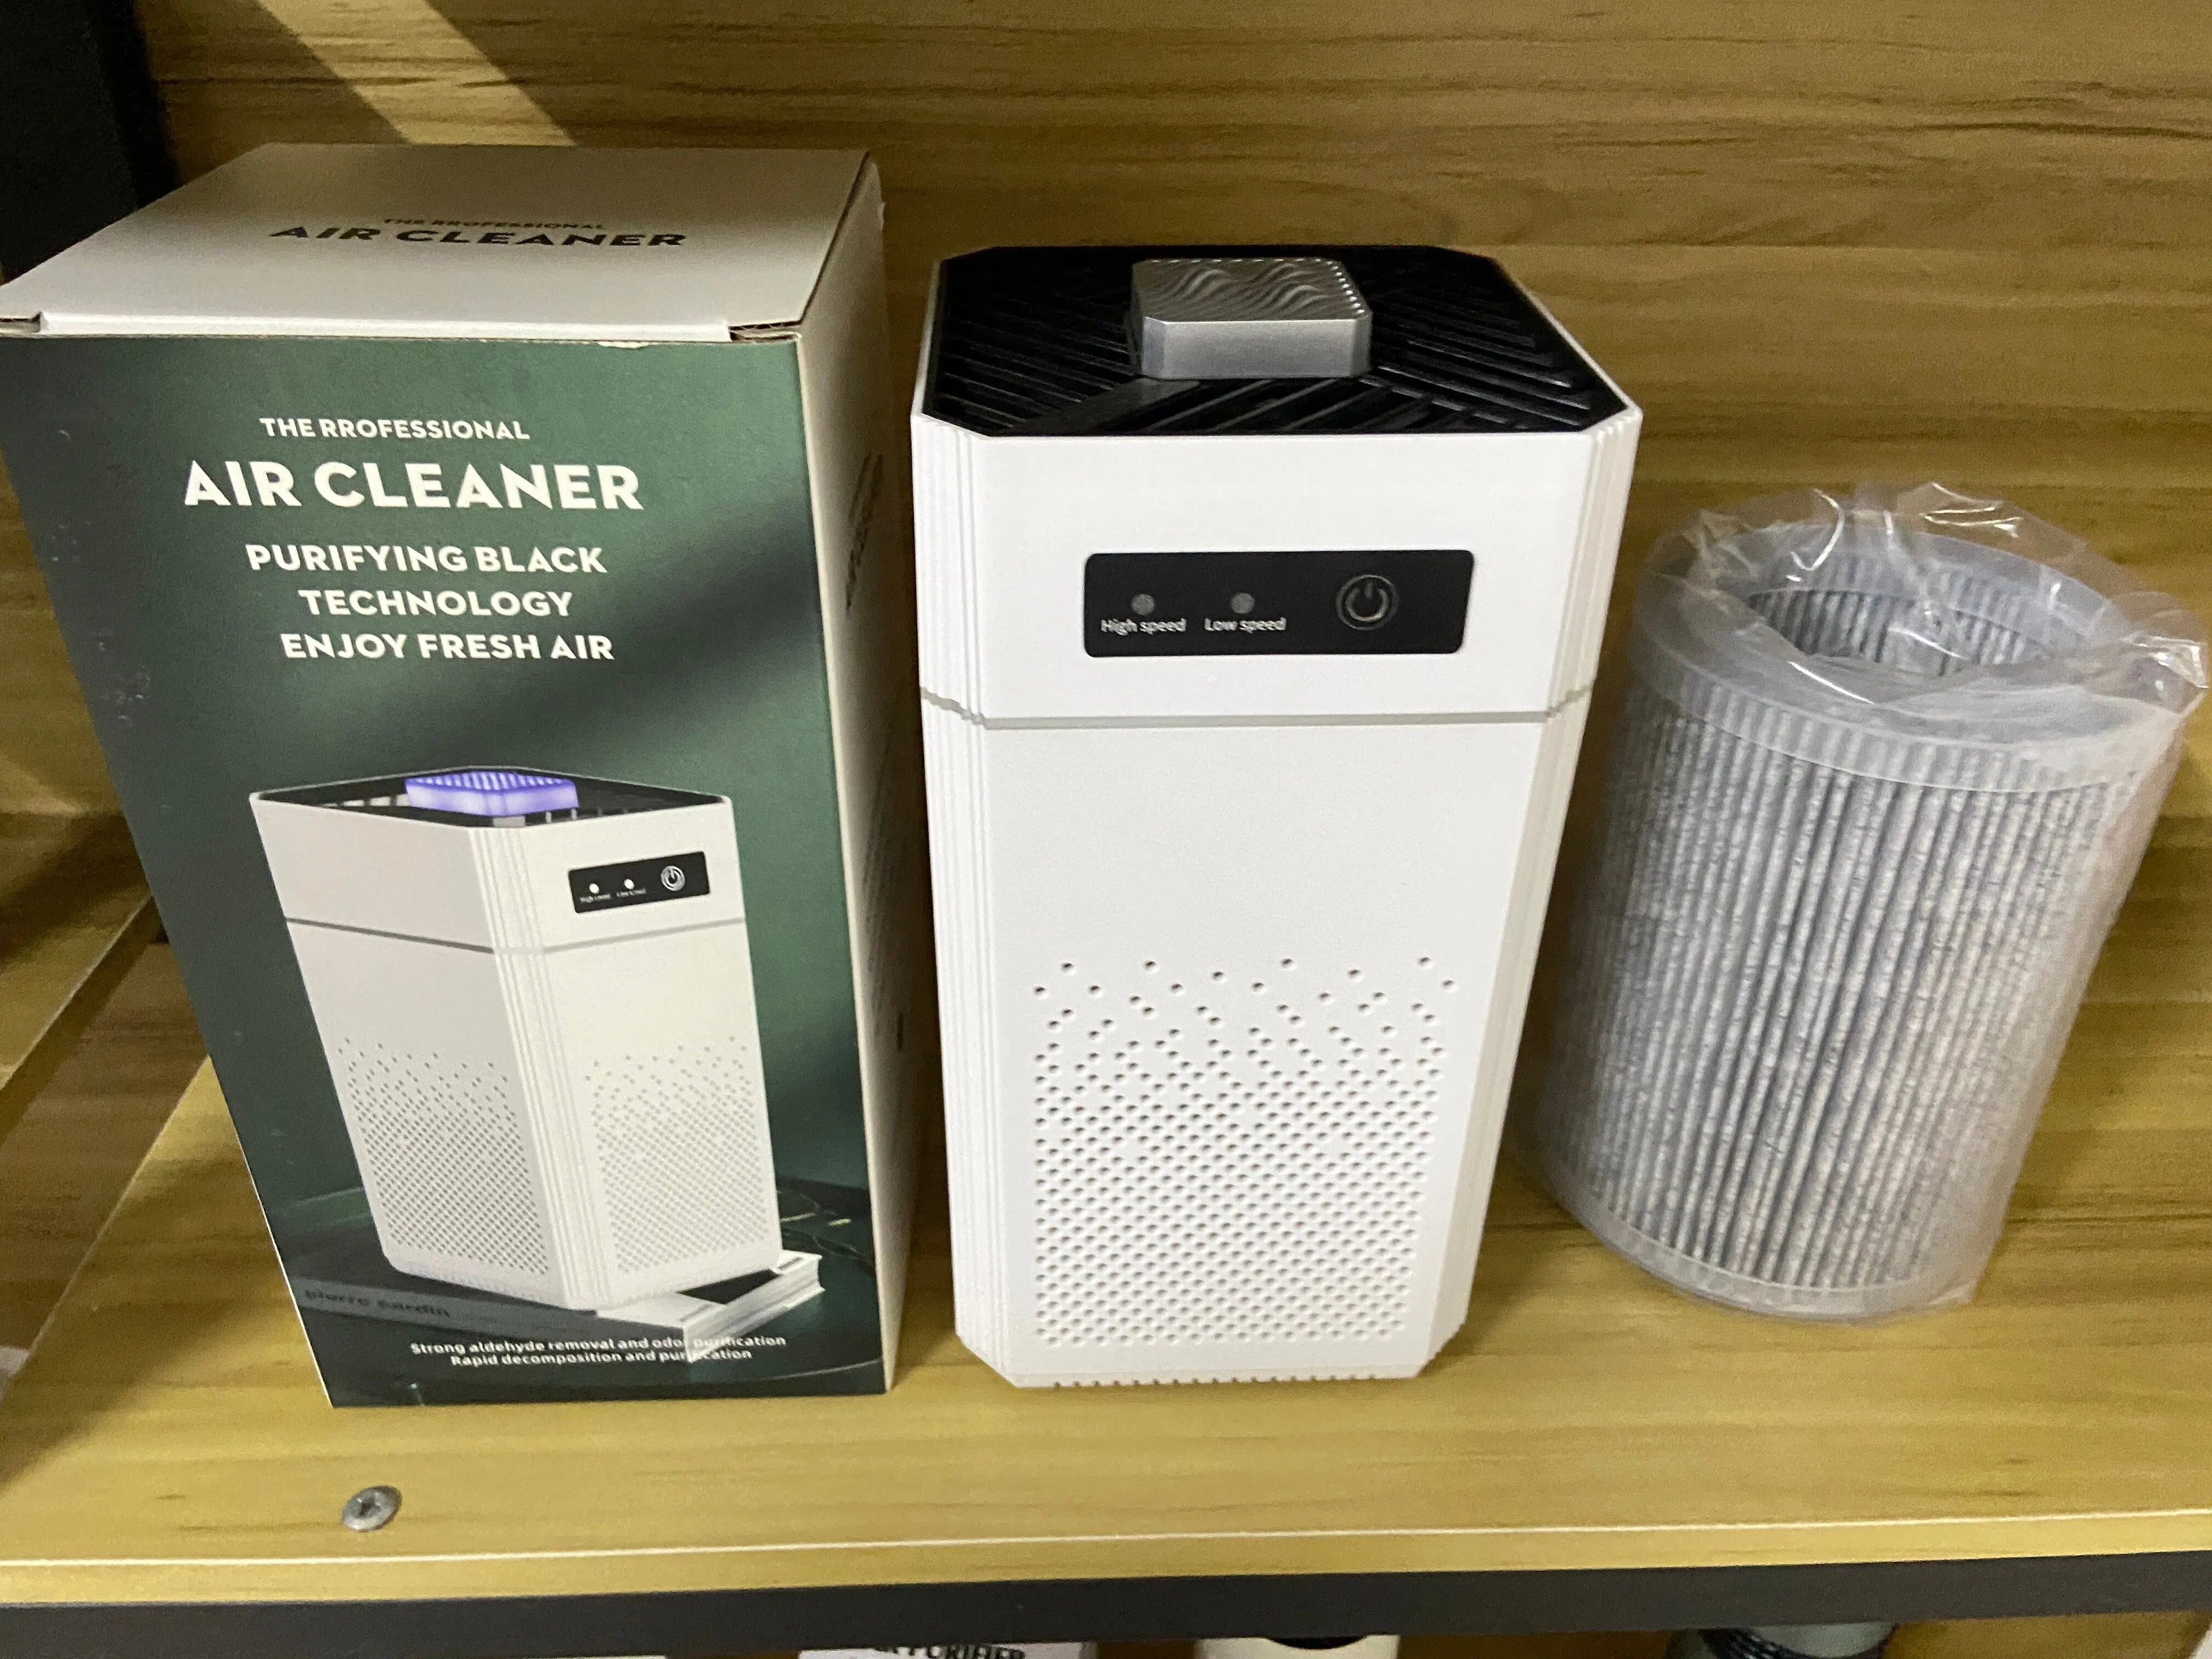 Smart Air Purifier Negative Ions Generator Nano Filtration Formaldehyde Removal Intelligent Secondhand Smoke Air Ozonizer